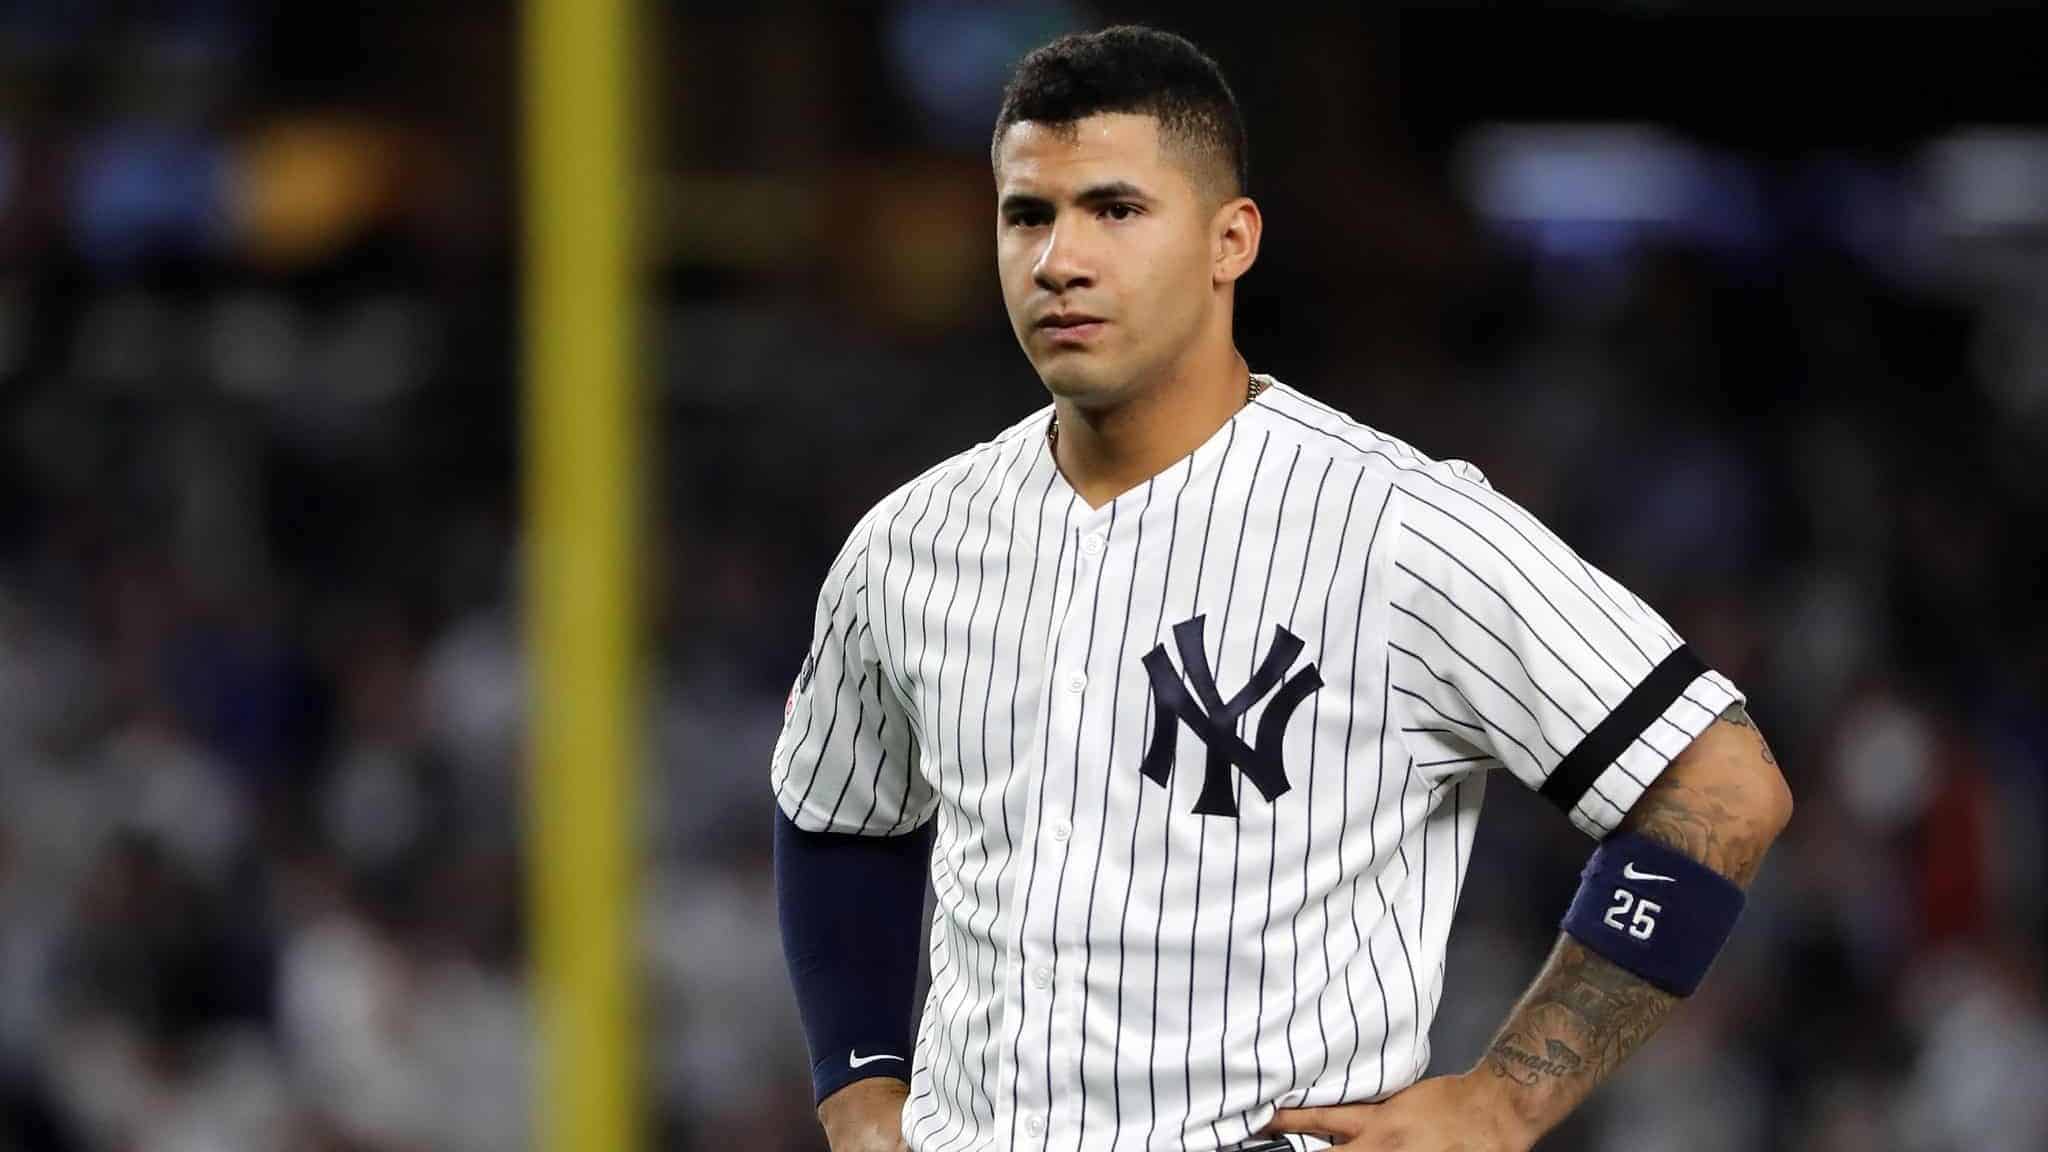 NEW YORK, NEW YORK - OCTOBER 15: Gleyber Torres #25 of the New York Yankees reacts during the fifth inning against the Houston Astros in game three of the American League Championship Series at Yankee Stadium on October 15, 2019 in New York City.